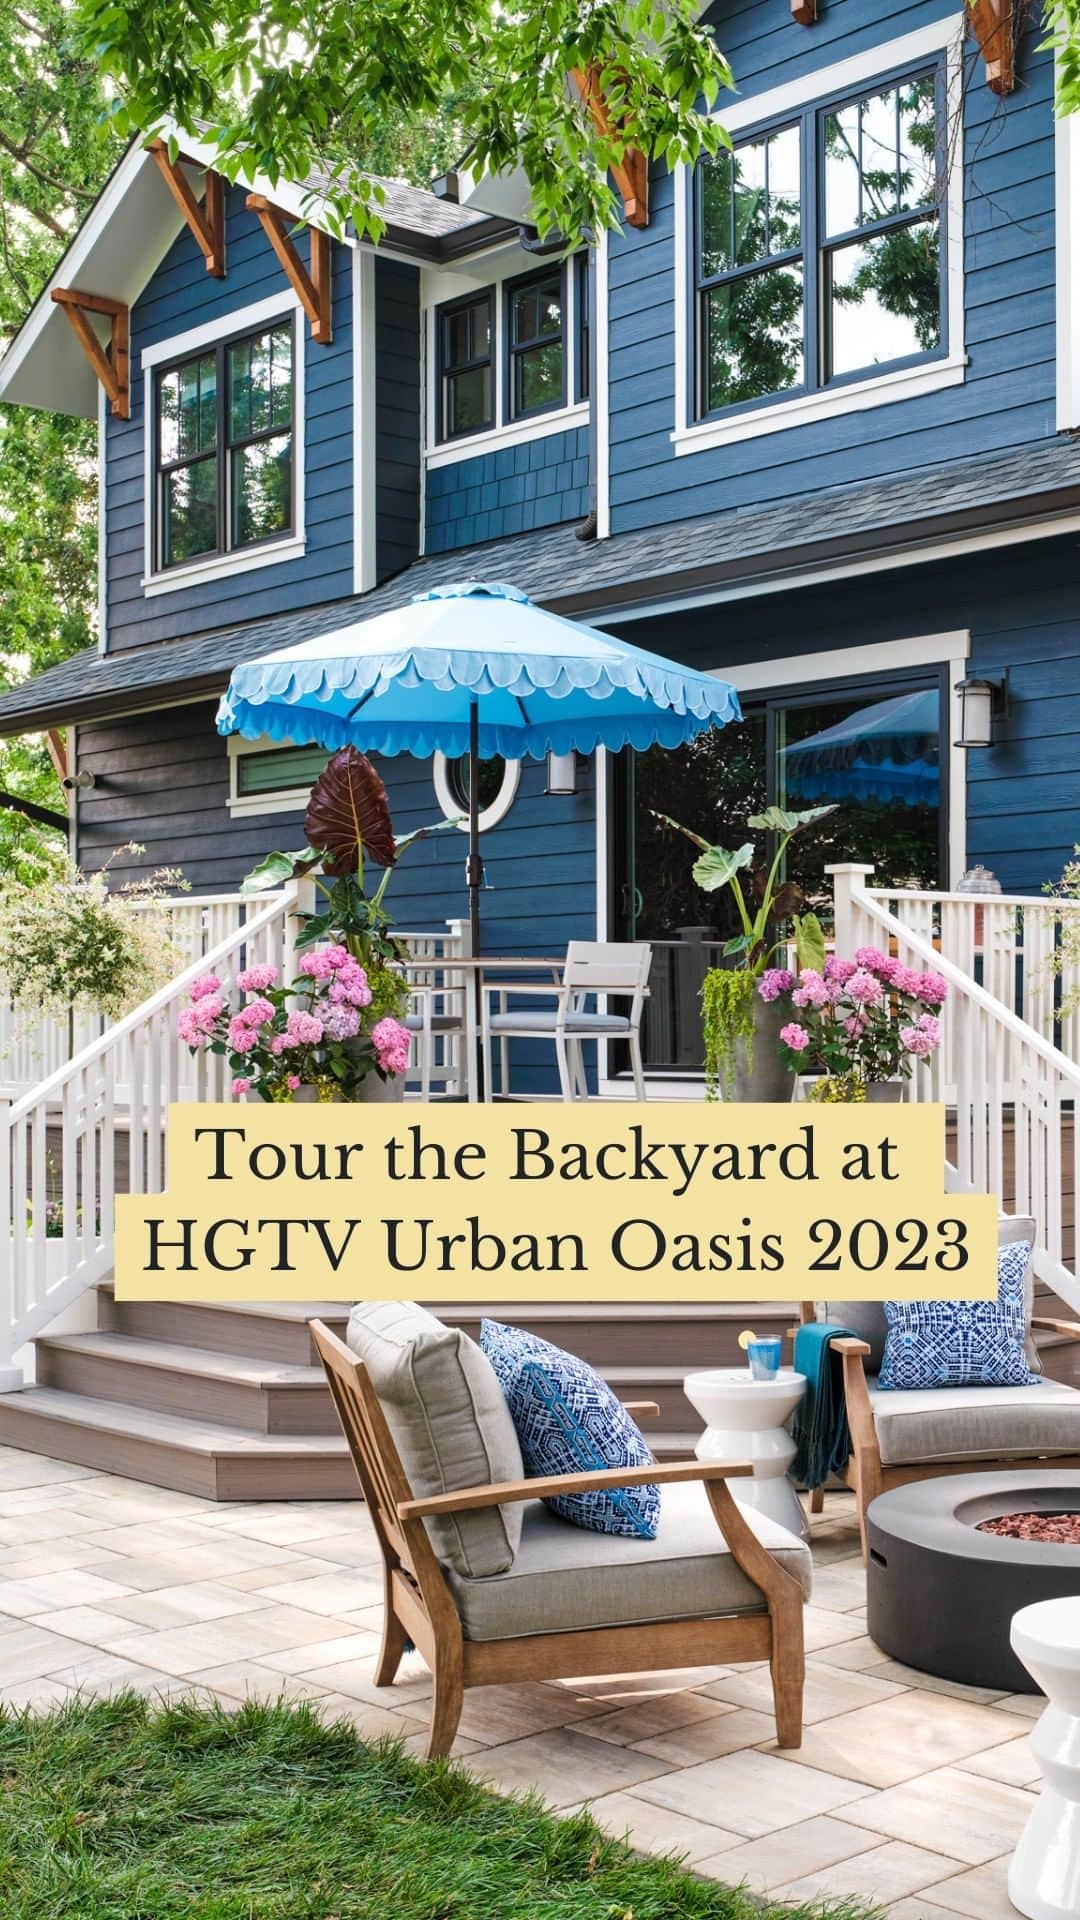 HGTVのインスタグラム：「Welcome to your little slice of southern paradise. ☀️ Tour the backyard at HGTV Urban Oasis 2023 + sign up for sweepstakes reminders when you click this post at our link in bio. Your chance to WIN this $850K grand prize in Louisville, KY starts 10/2. ⏰」